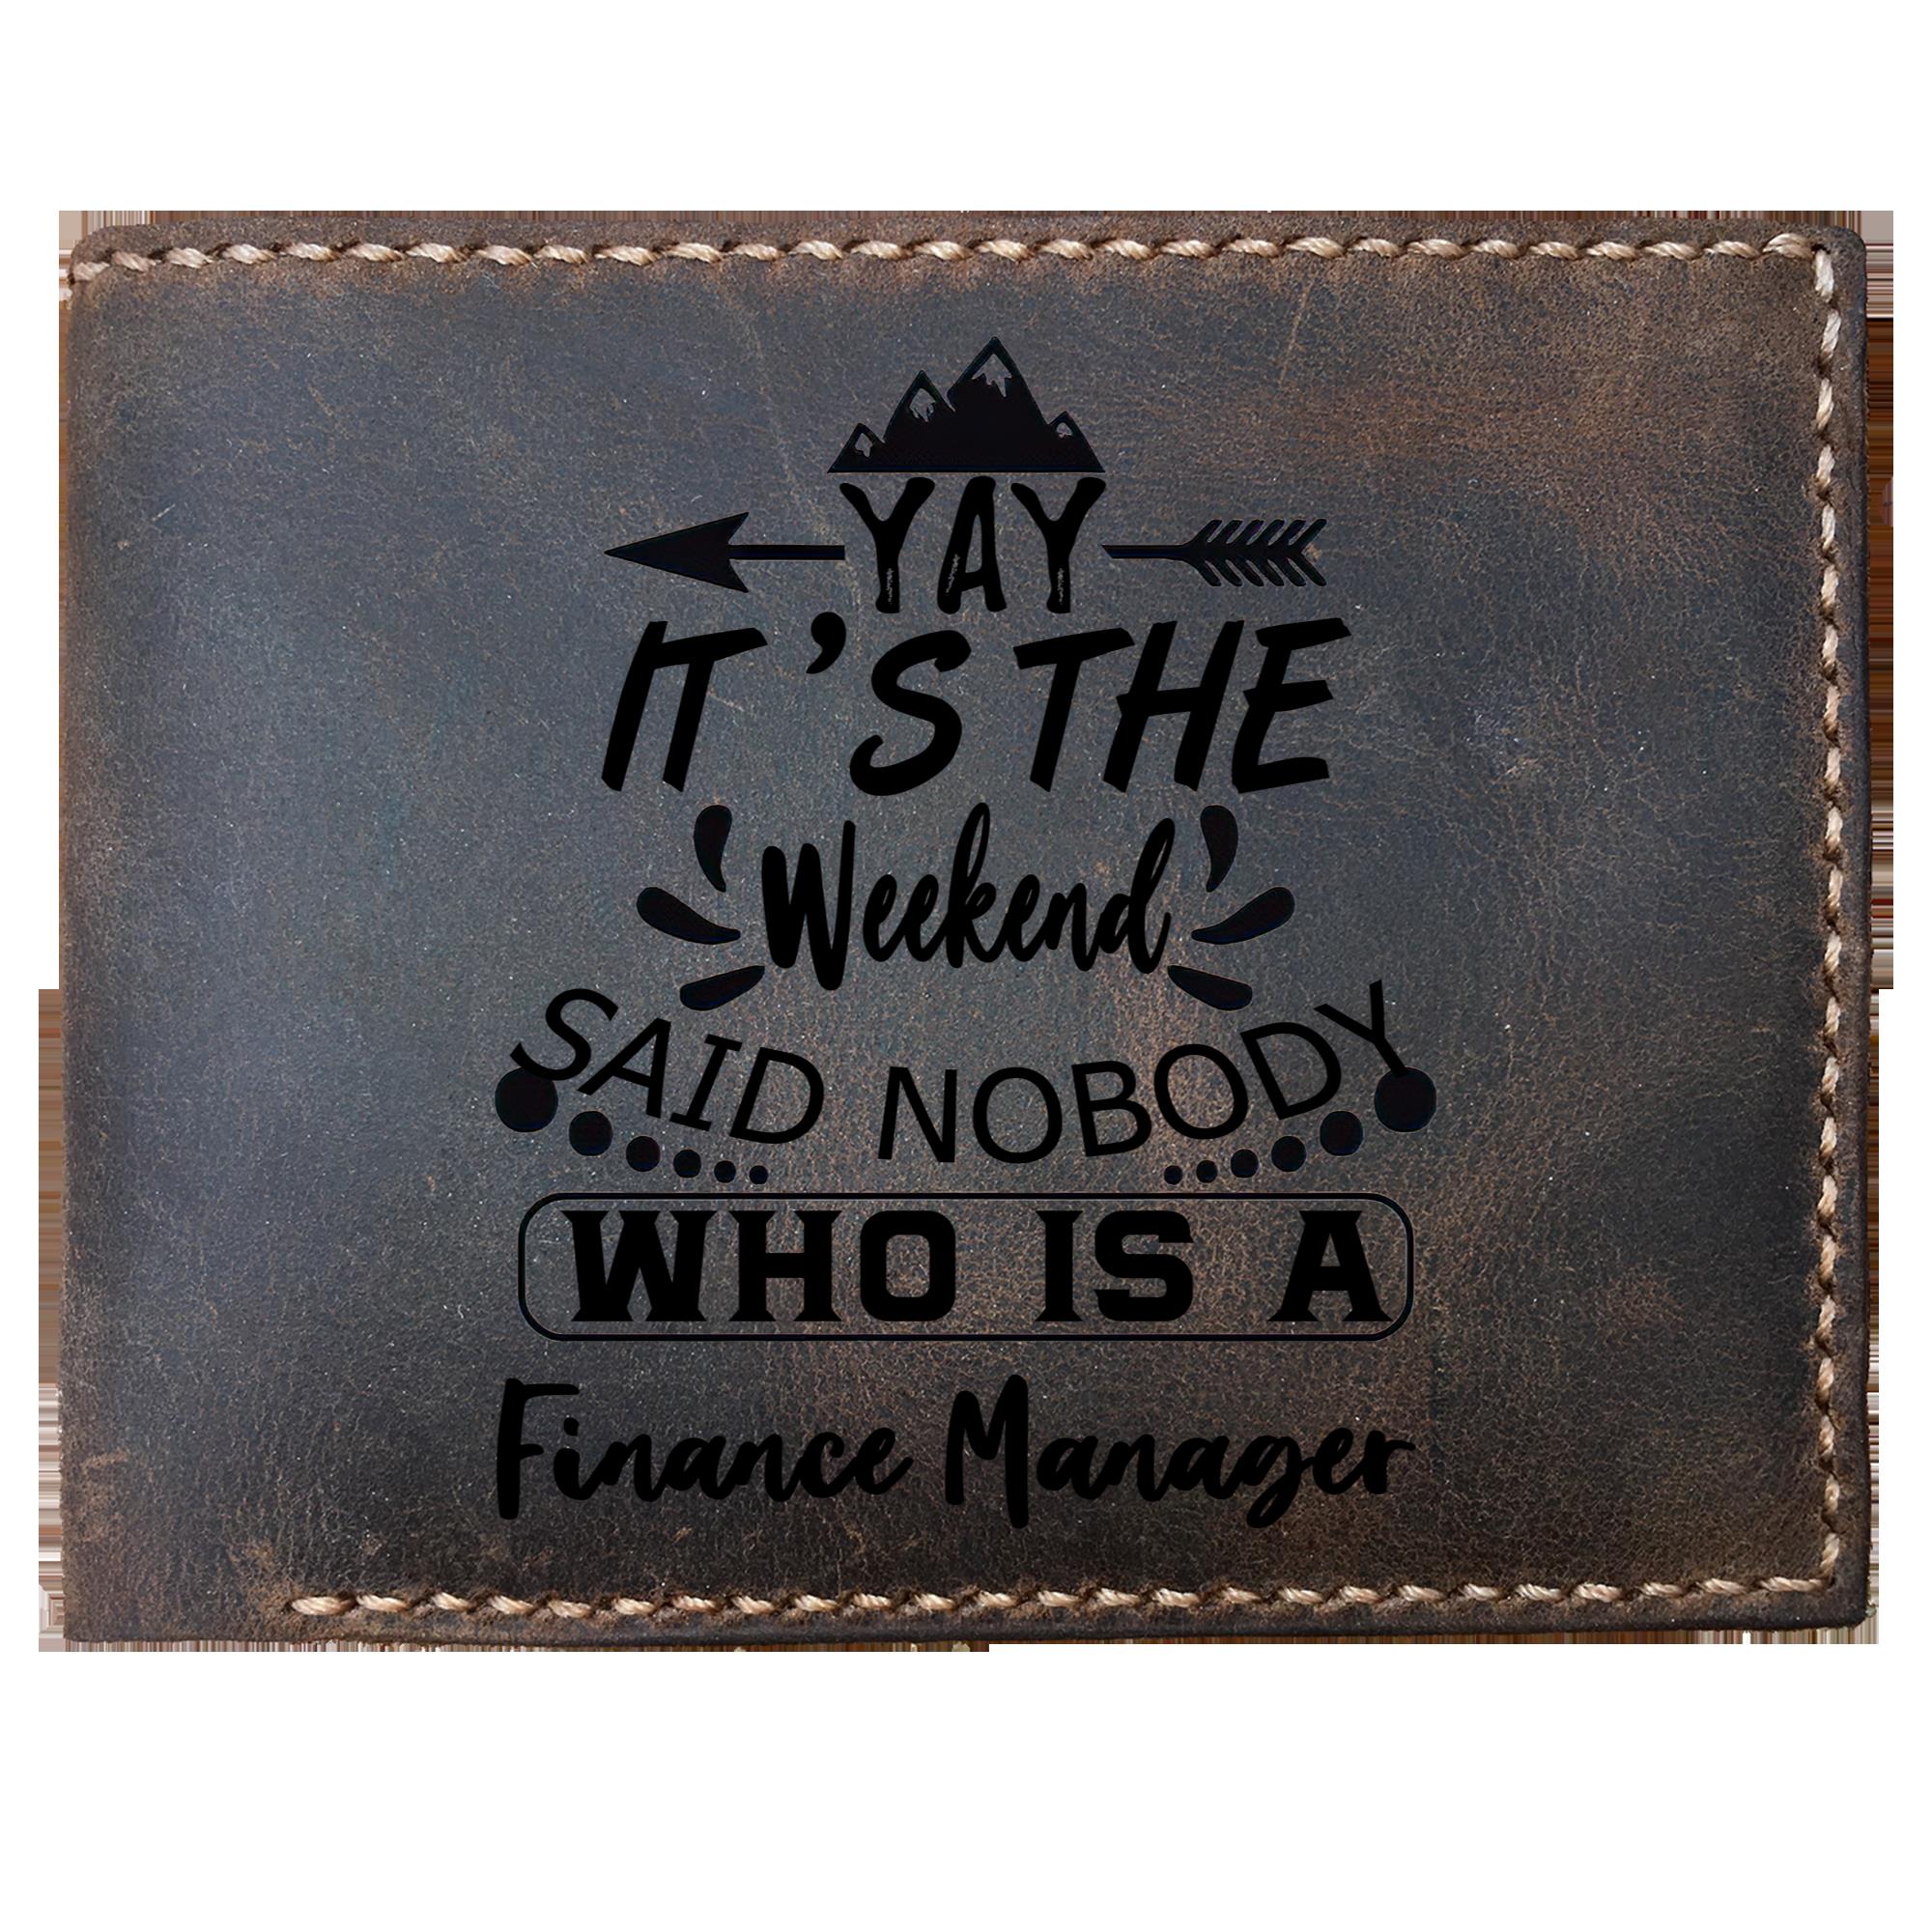 Skitongifts Funny Custom Laser Engraved Bifold Leather Wallet For Men, It's The Weekend Said Nobody Who Is A Finance Manager, Father's Day Gifts